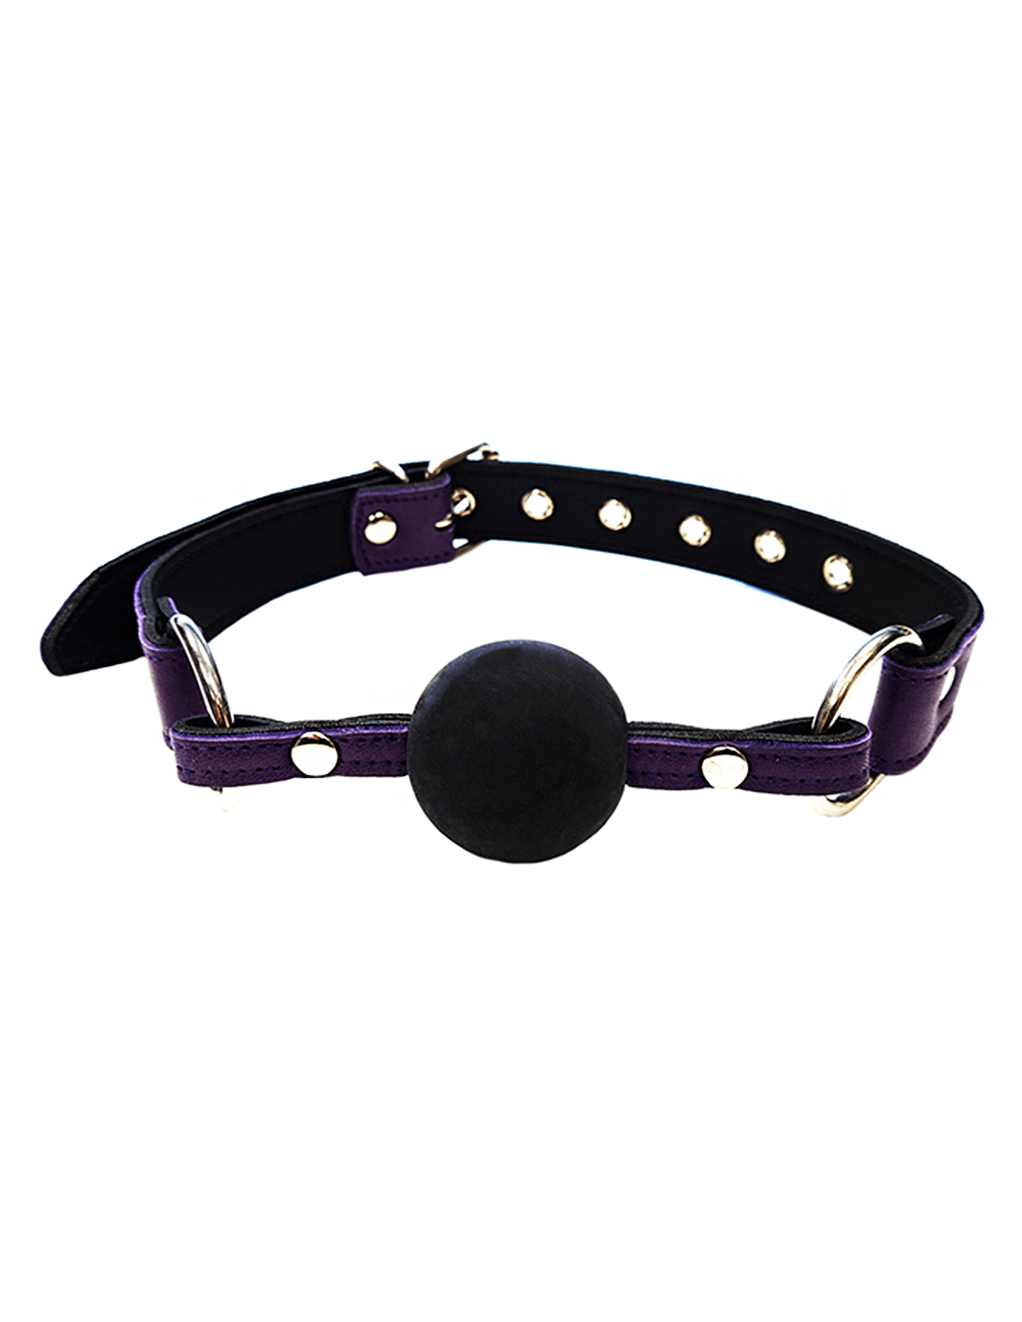 Rouge Leather & Rubber Ball Gag - Purple/Black - Main